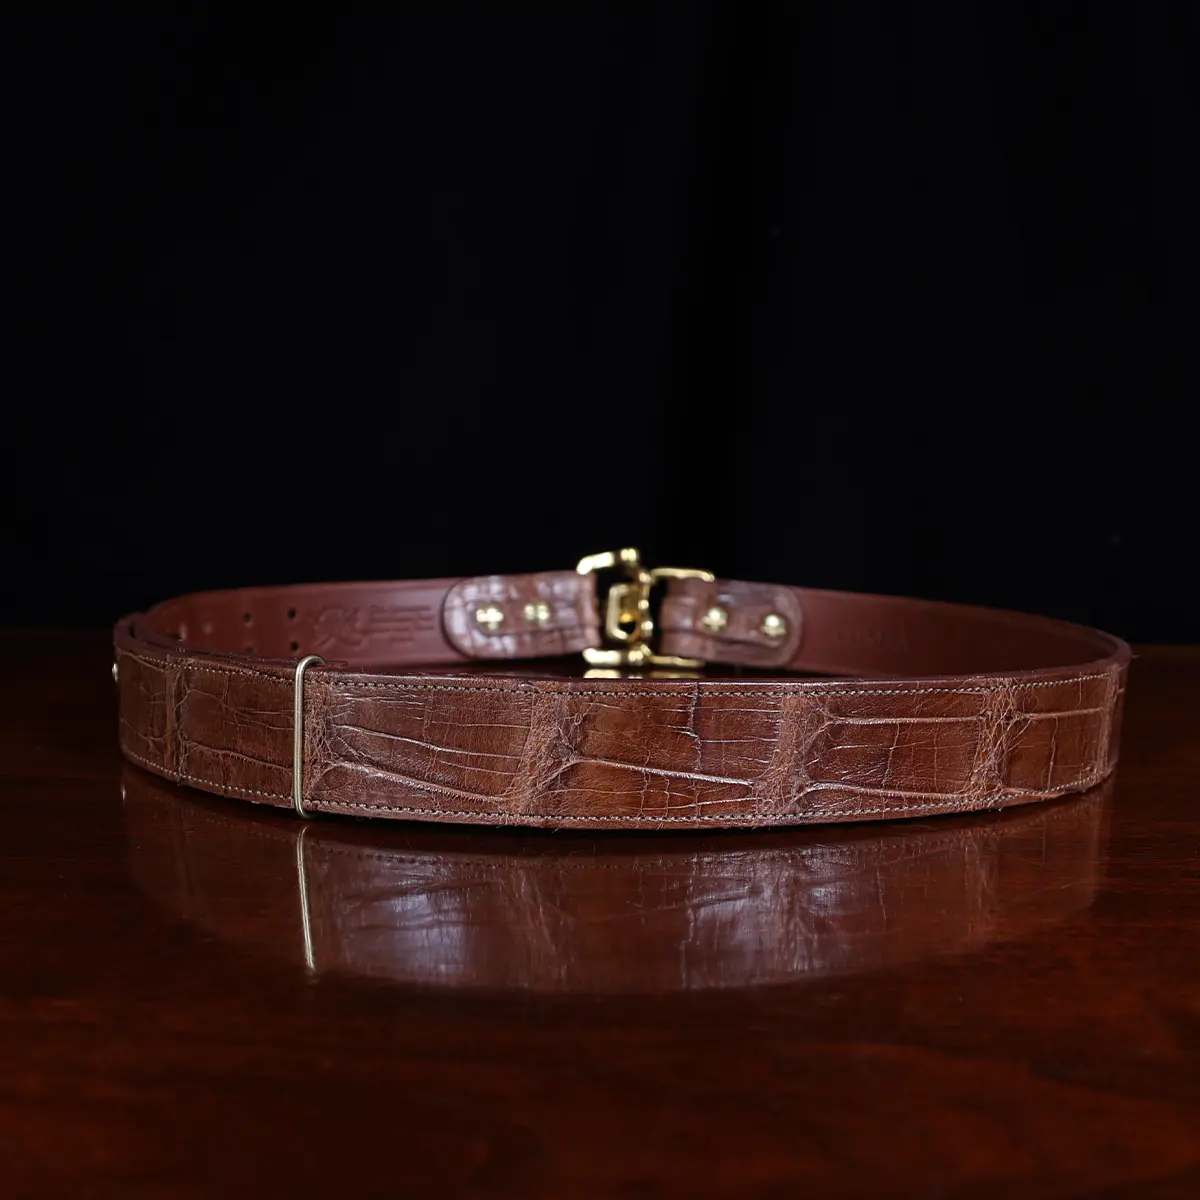 No. 5 Cinch Belt in brown American Alligator and brass buckle - ID 001 - back view on black background